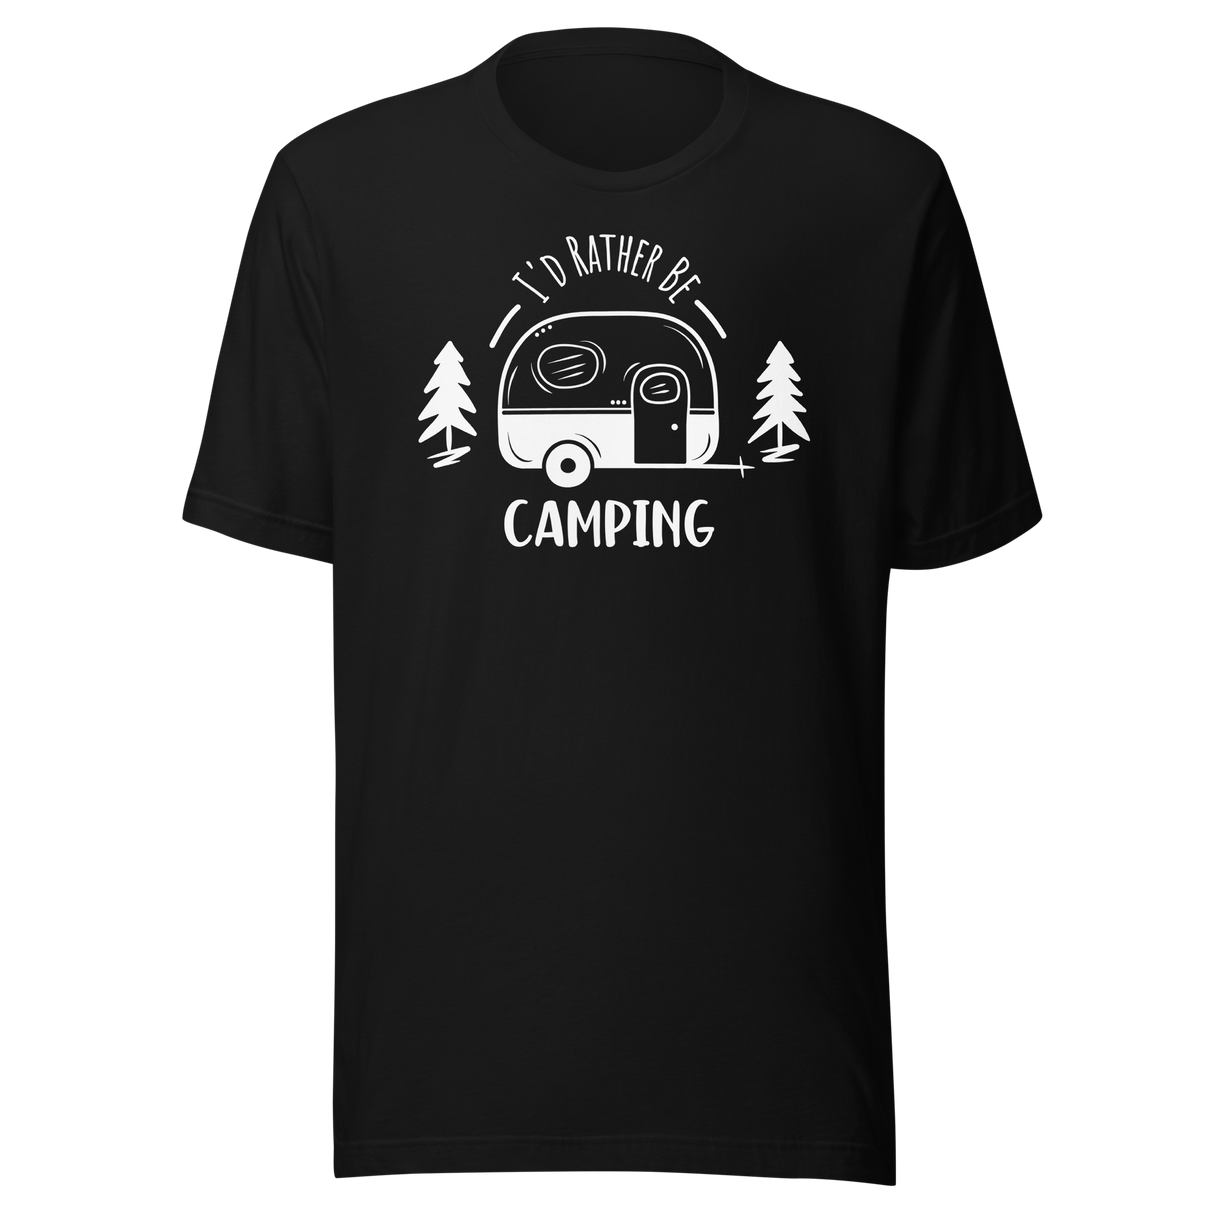 id-rather-be-camping-travel-tee-outdoors-t-shirt-travel-tee-camping-t-shirt-adventure-tee#color_black